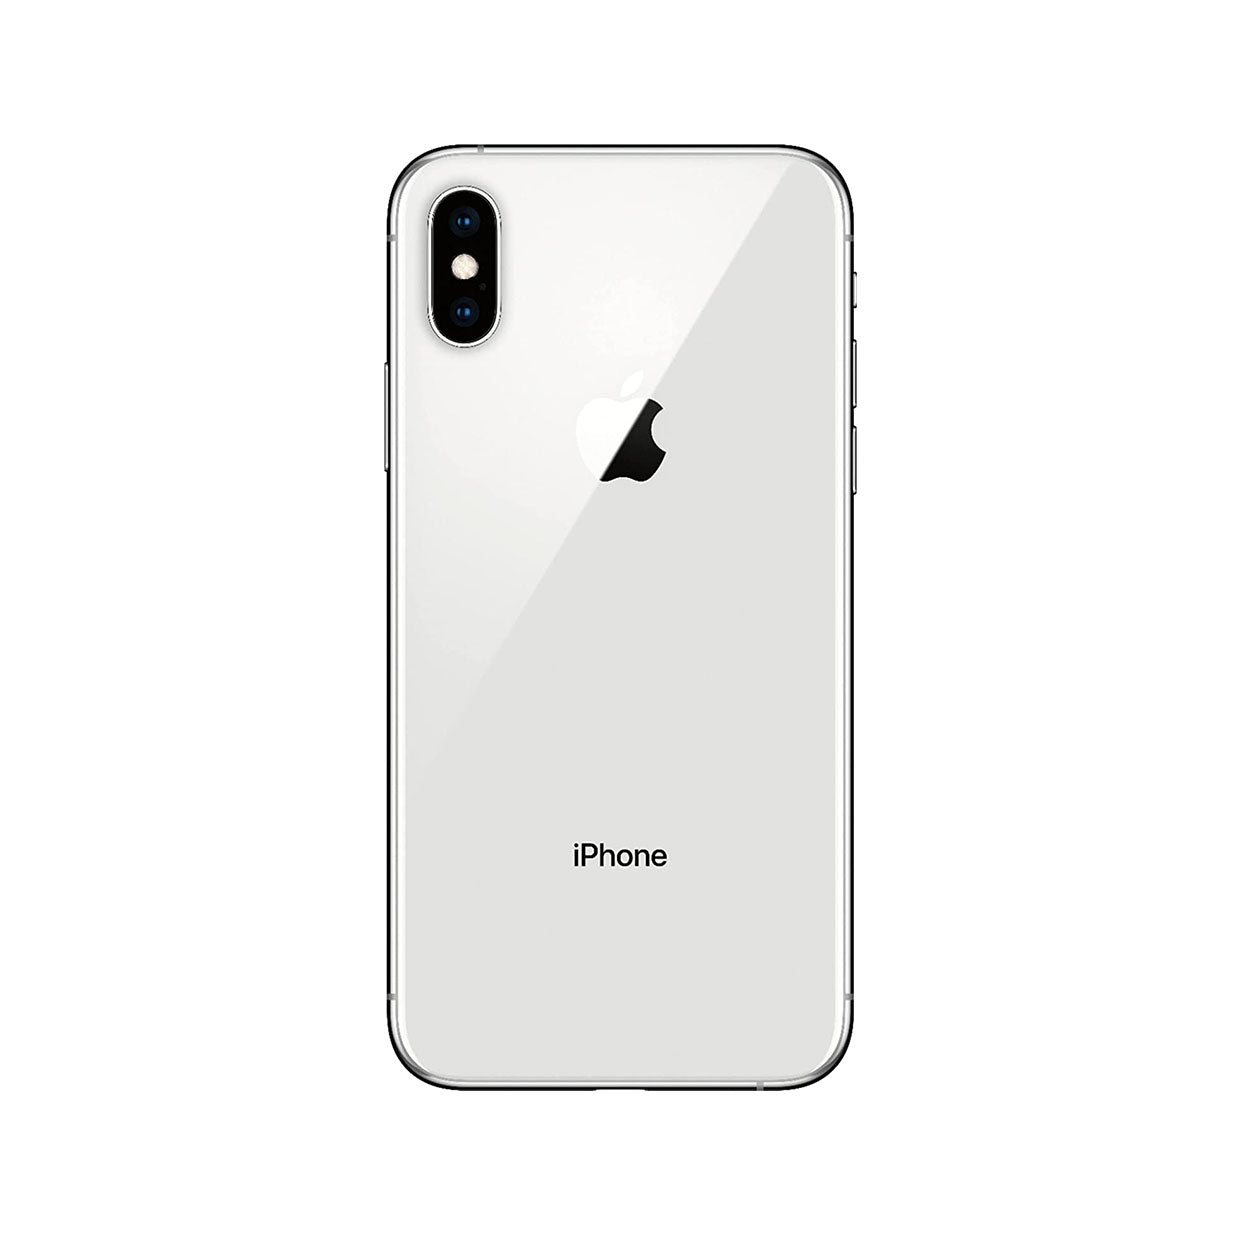 Apple iPhone XS, 512GB 4G LTE - Silver